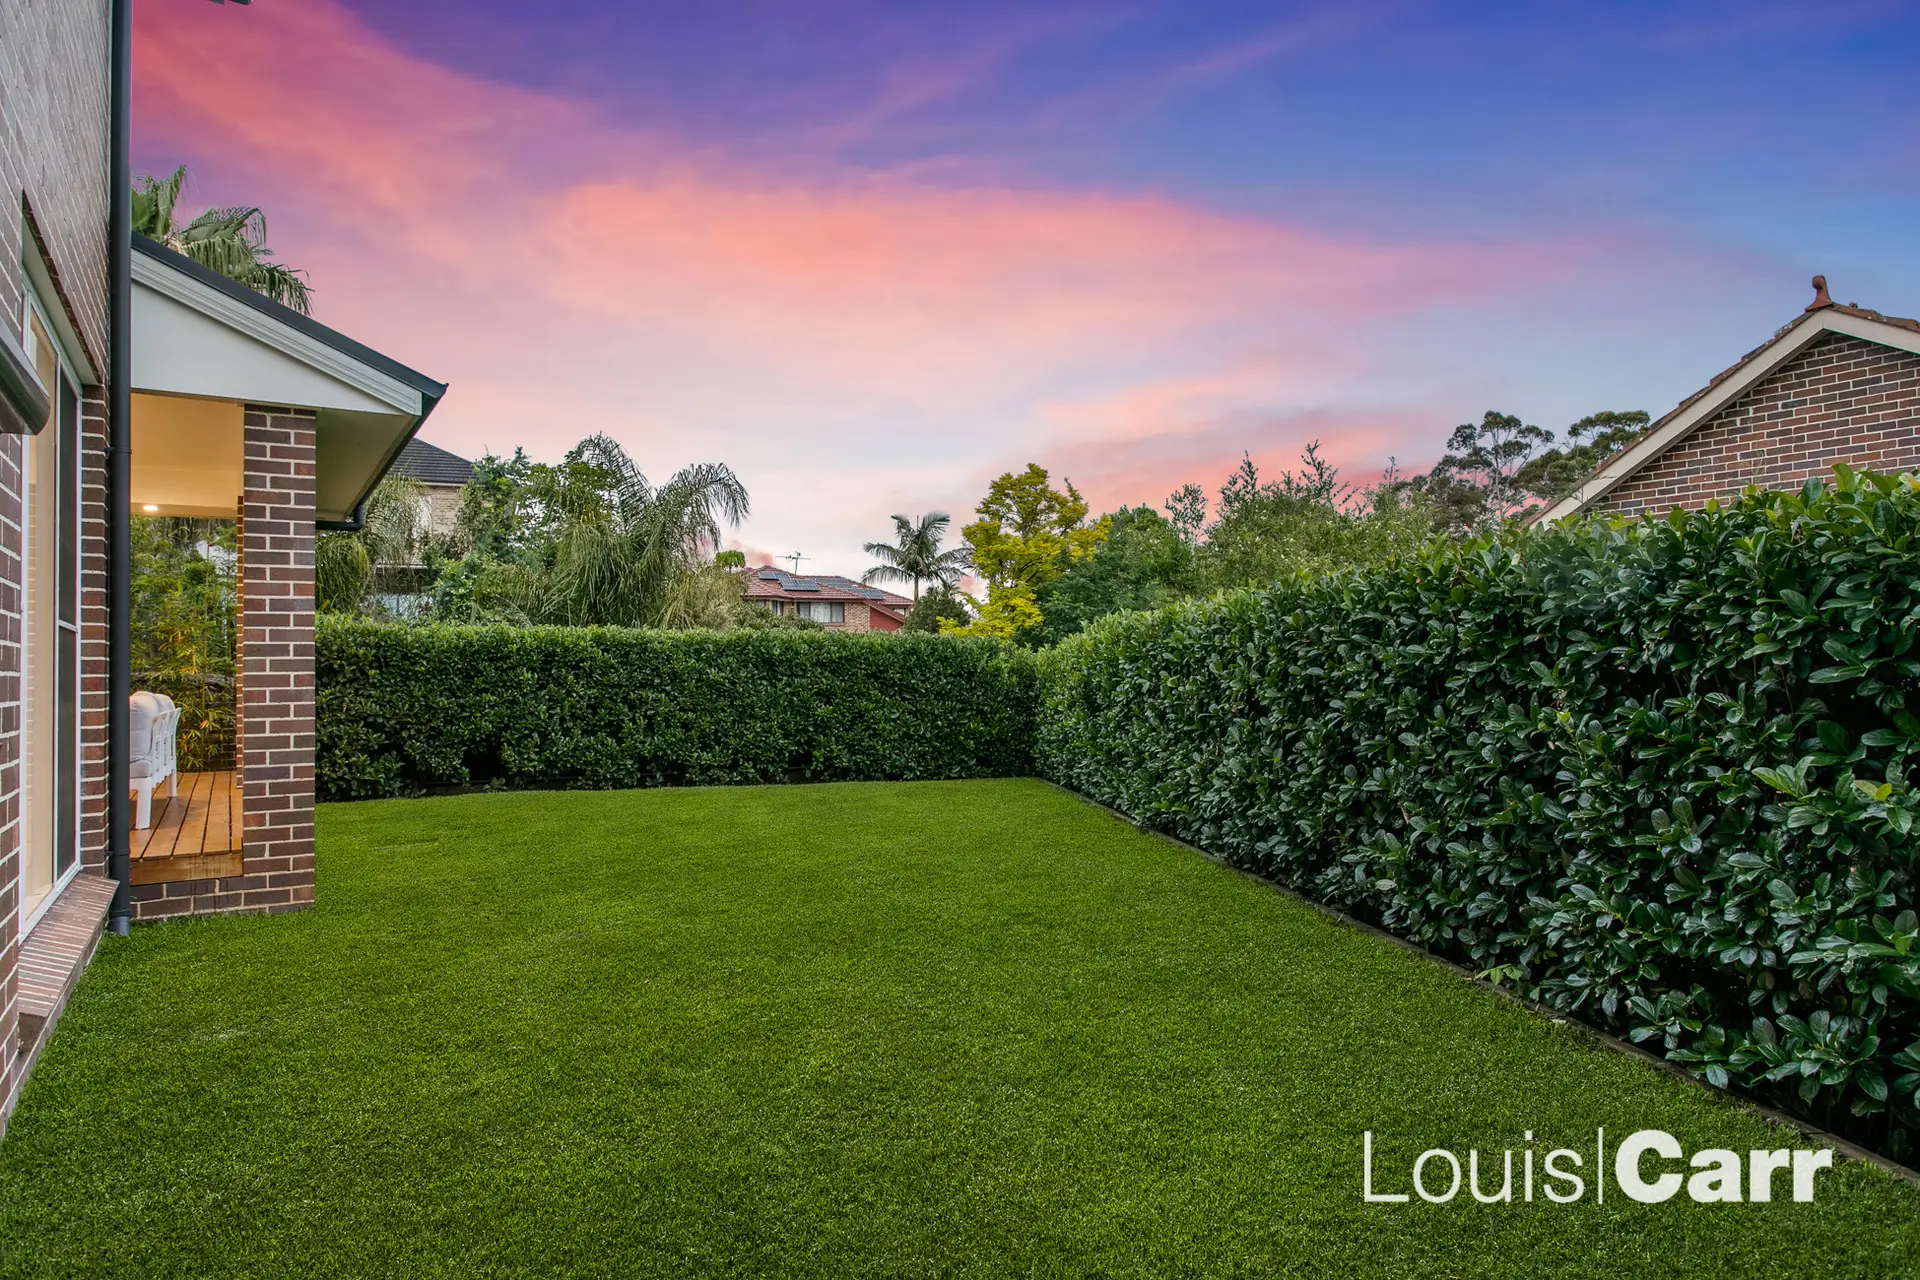 Photo #16: 2a Salisbury Downs Drive, West Pennant Hills - Sold by Louis Carr Real Estate